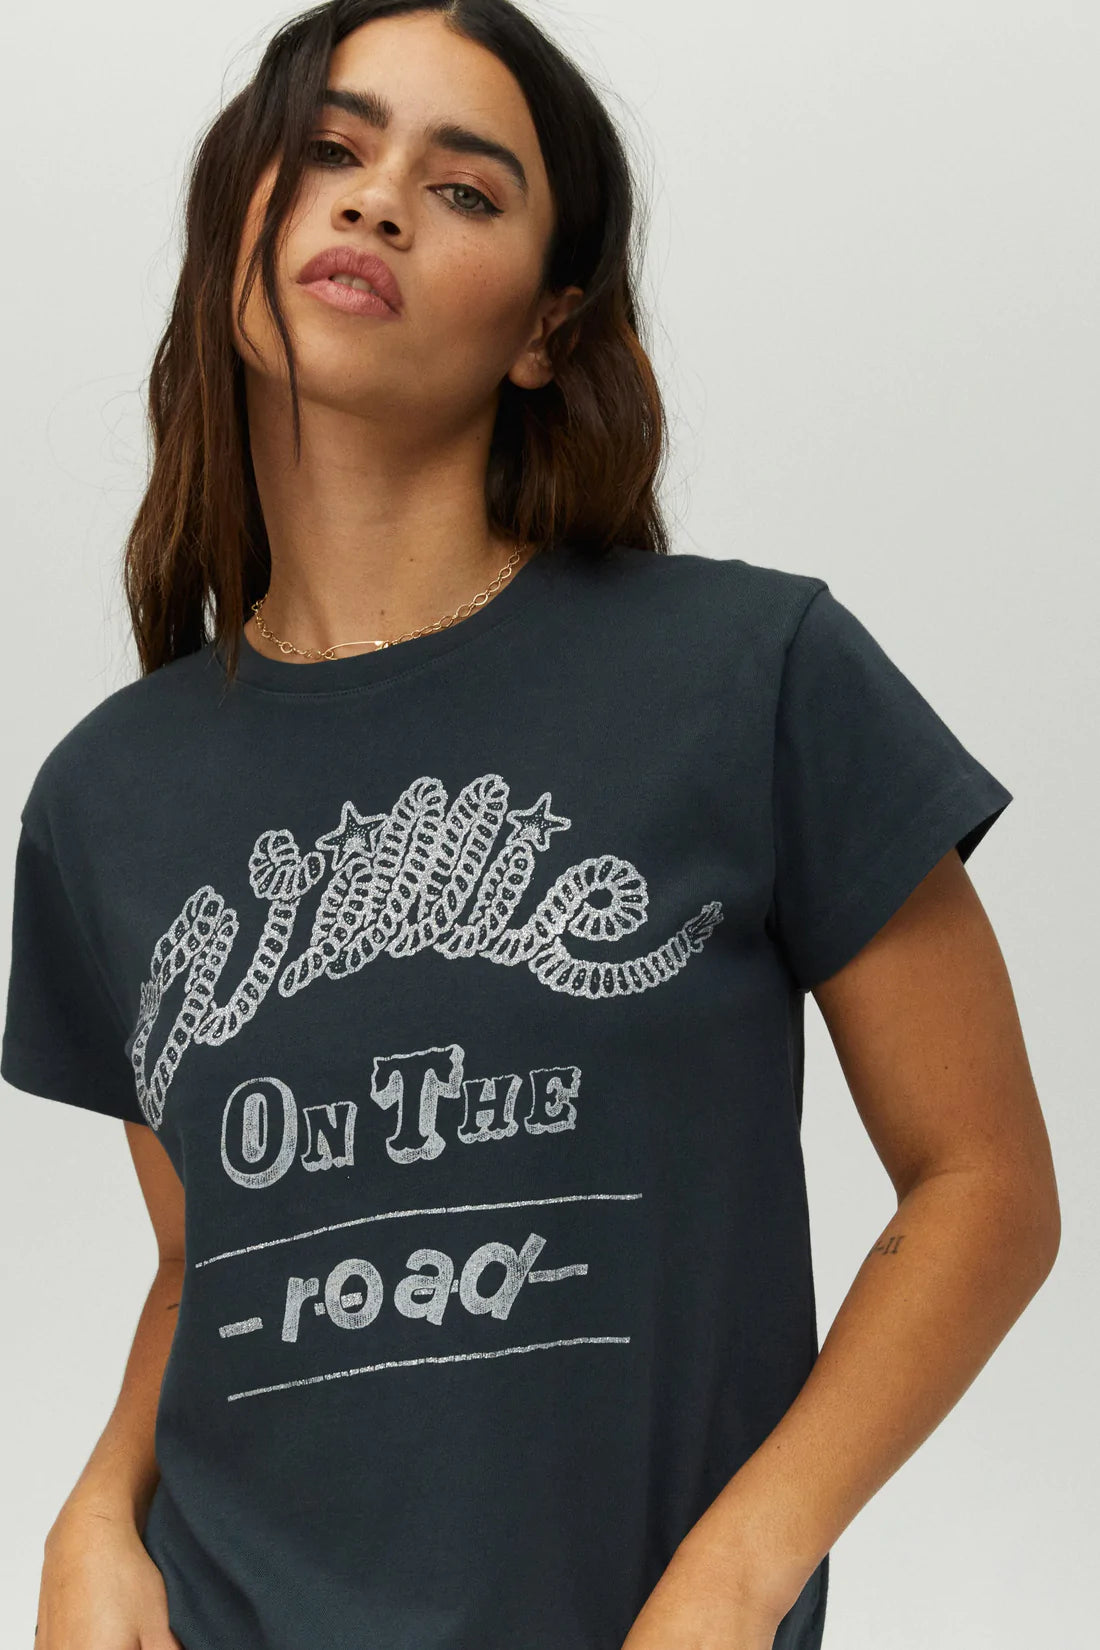 Willie Nelson The Road 78 Tour Tee